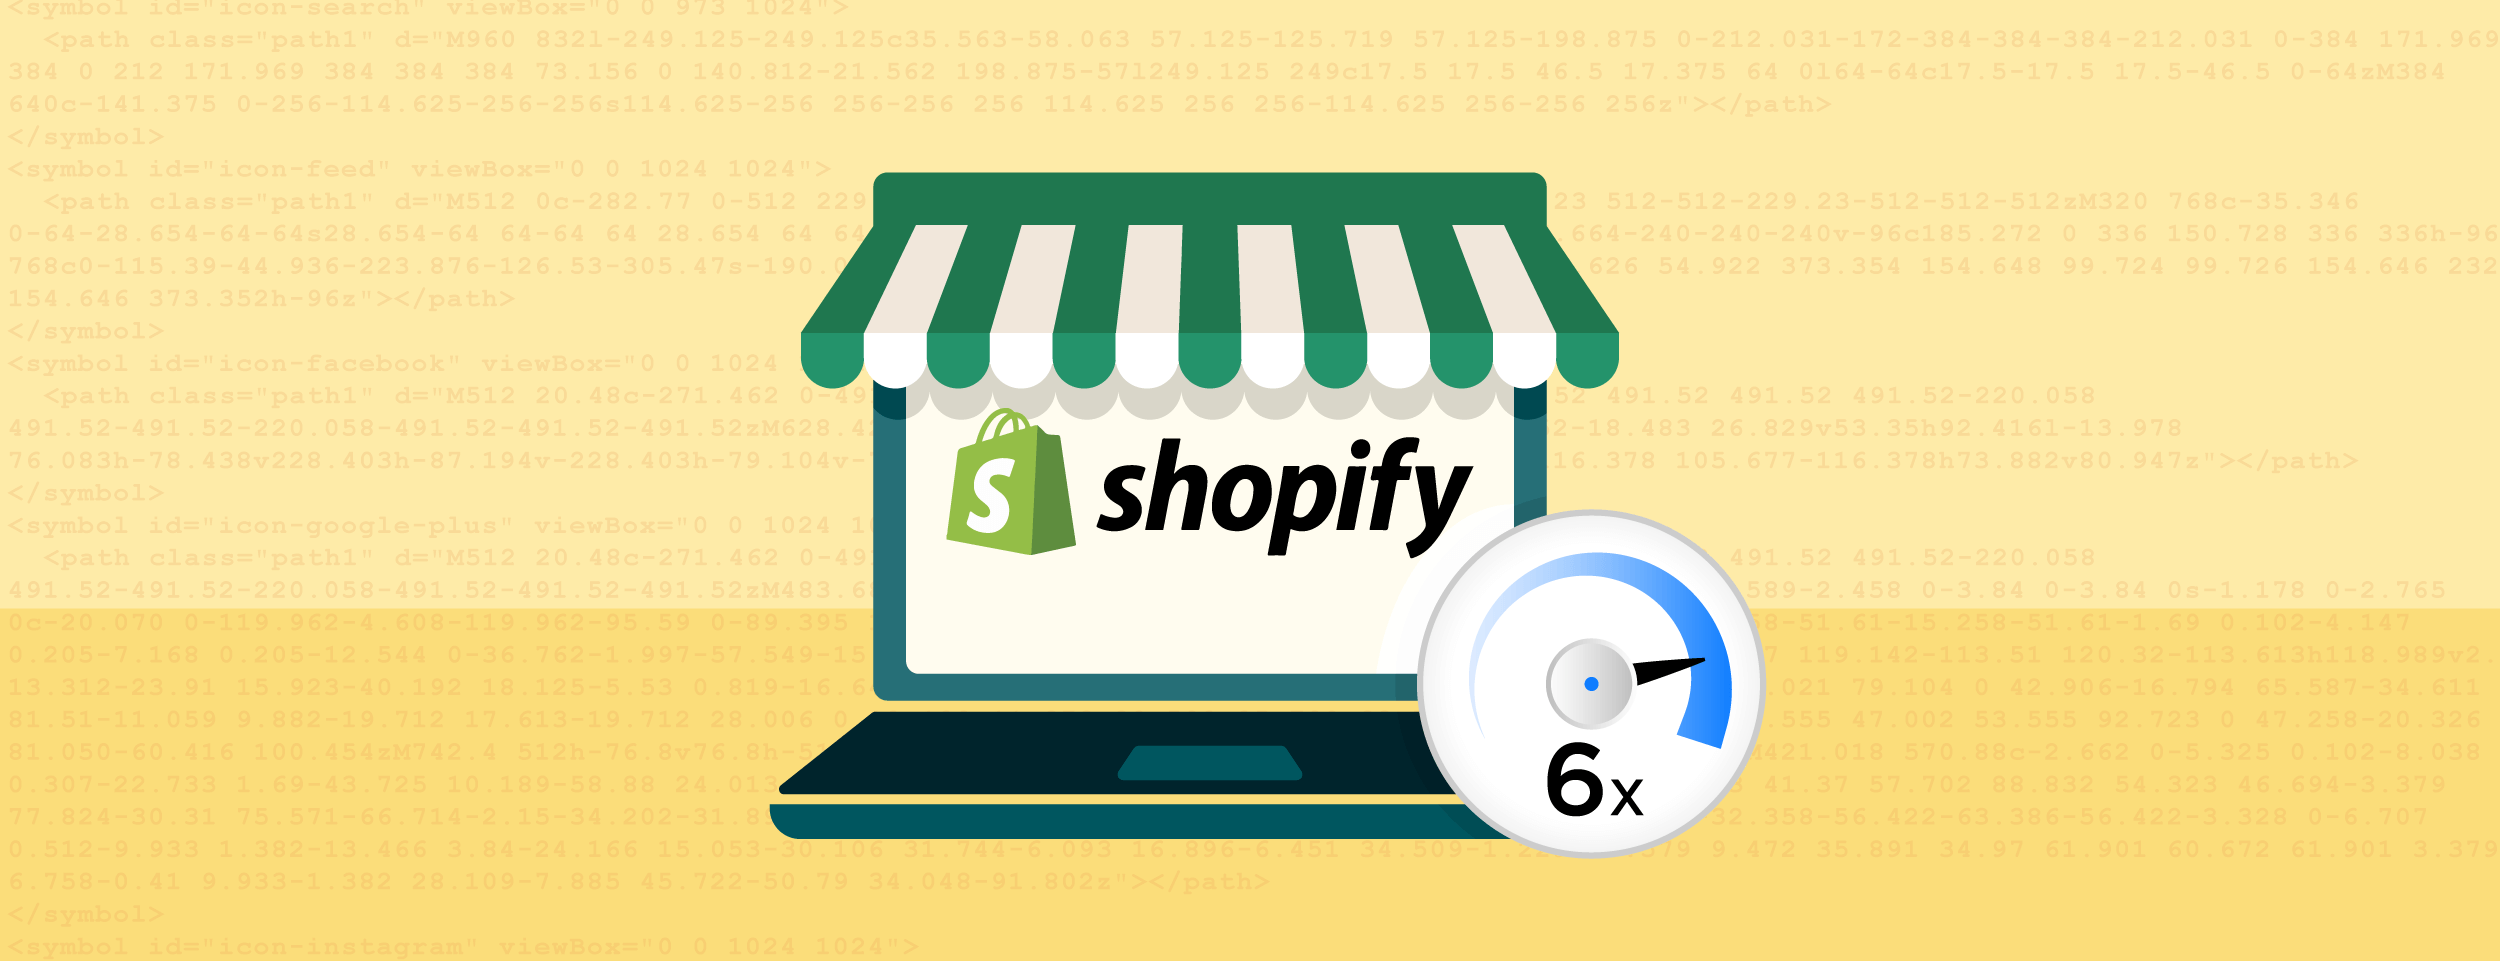 We found a way to optimize a Shopify site by 6x. Here’s how